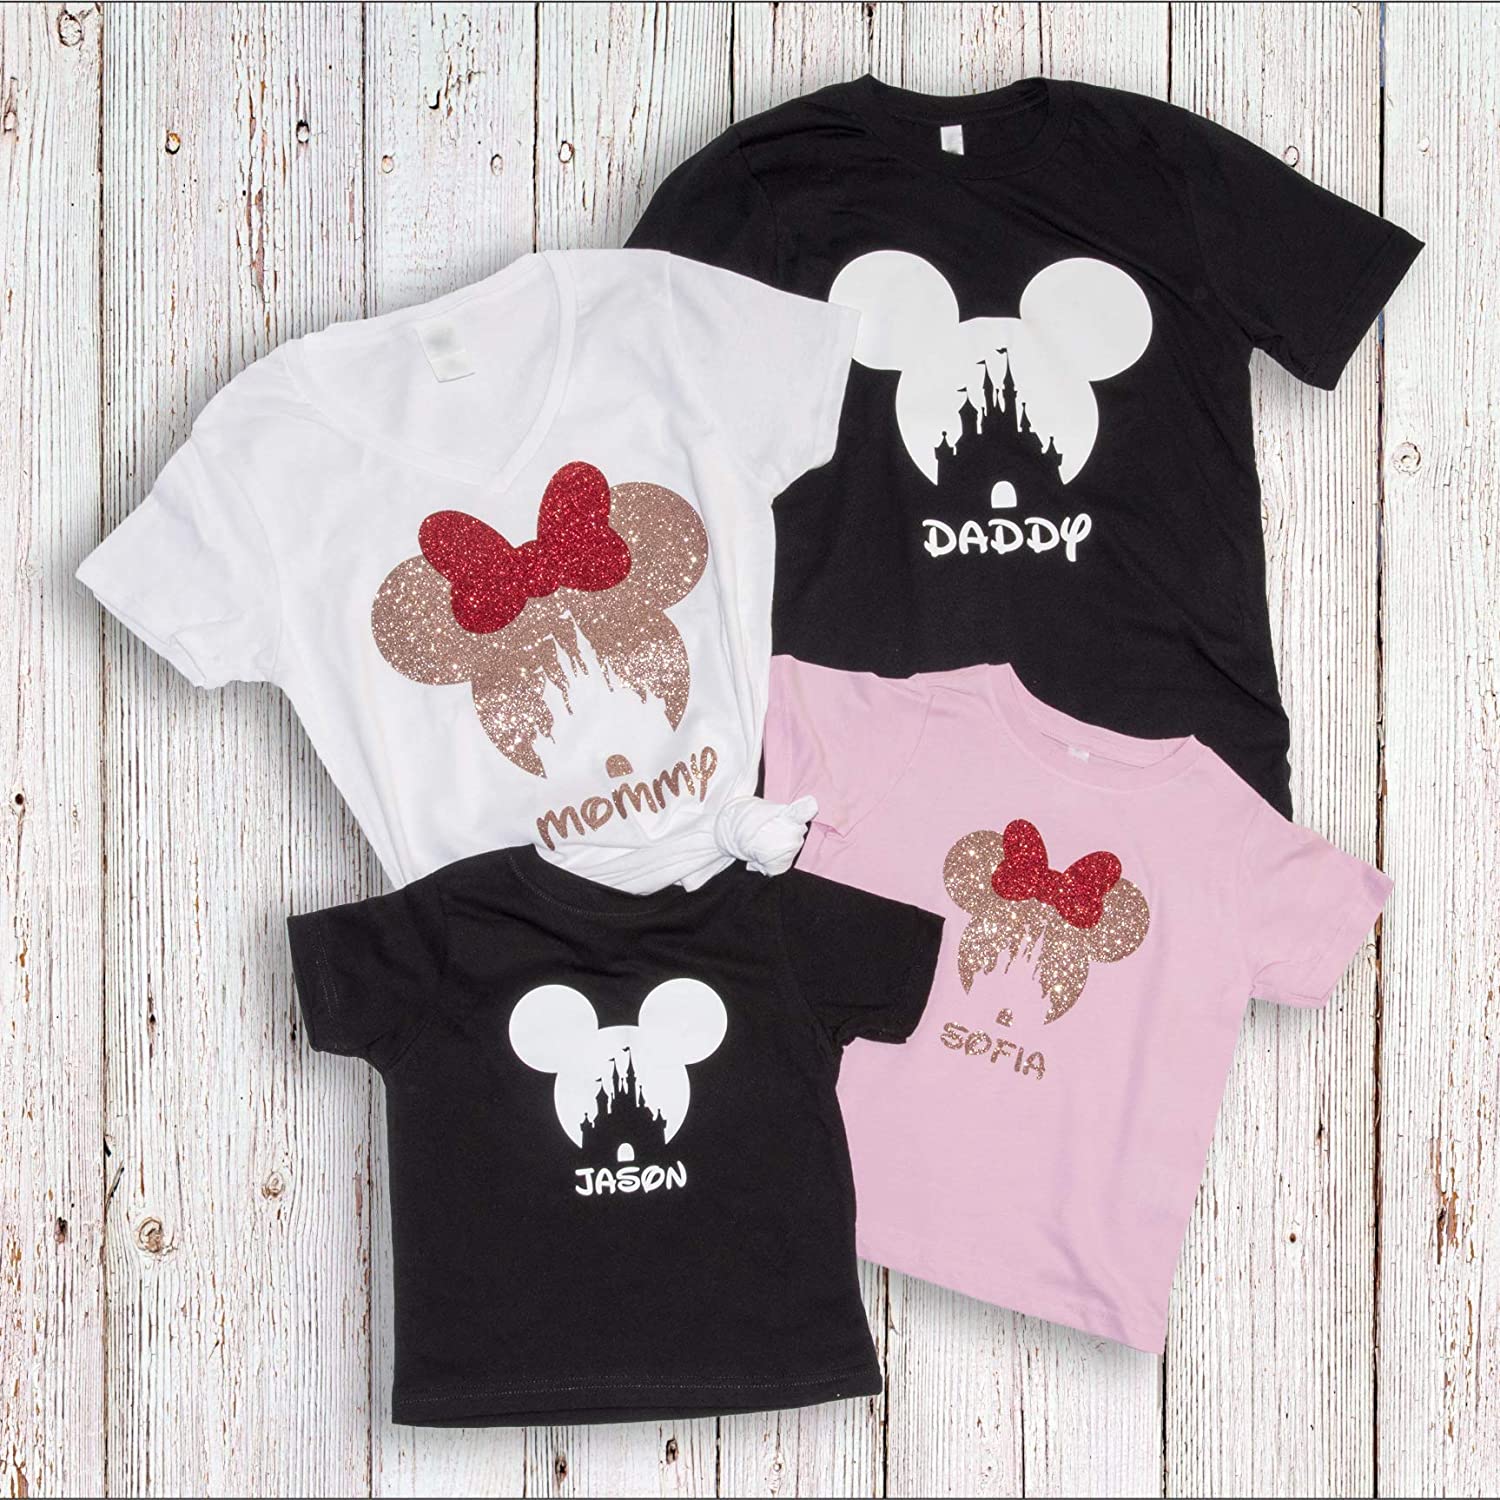 22 Unique Disney Family Shirts Disney With Dave #39 s Daughters